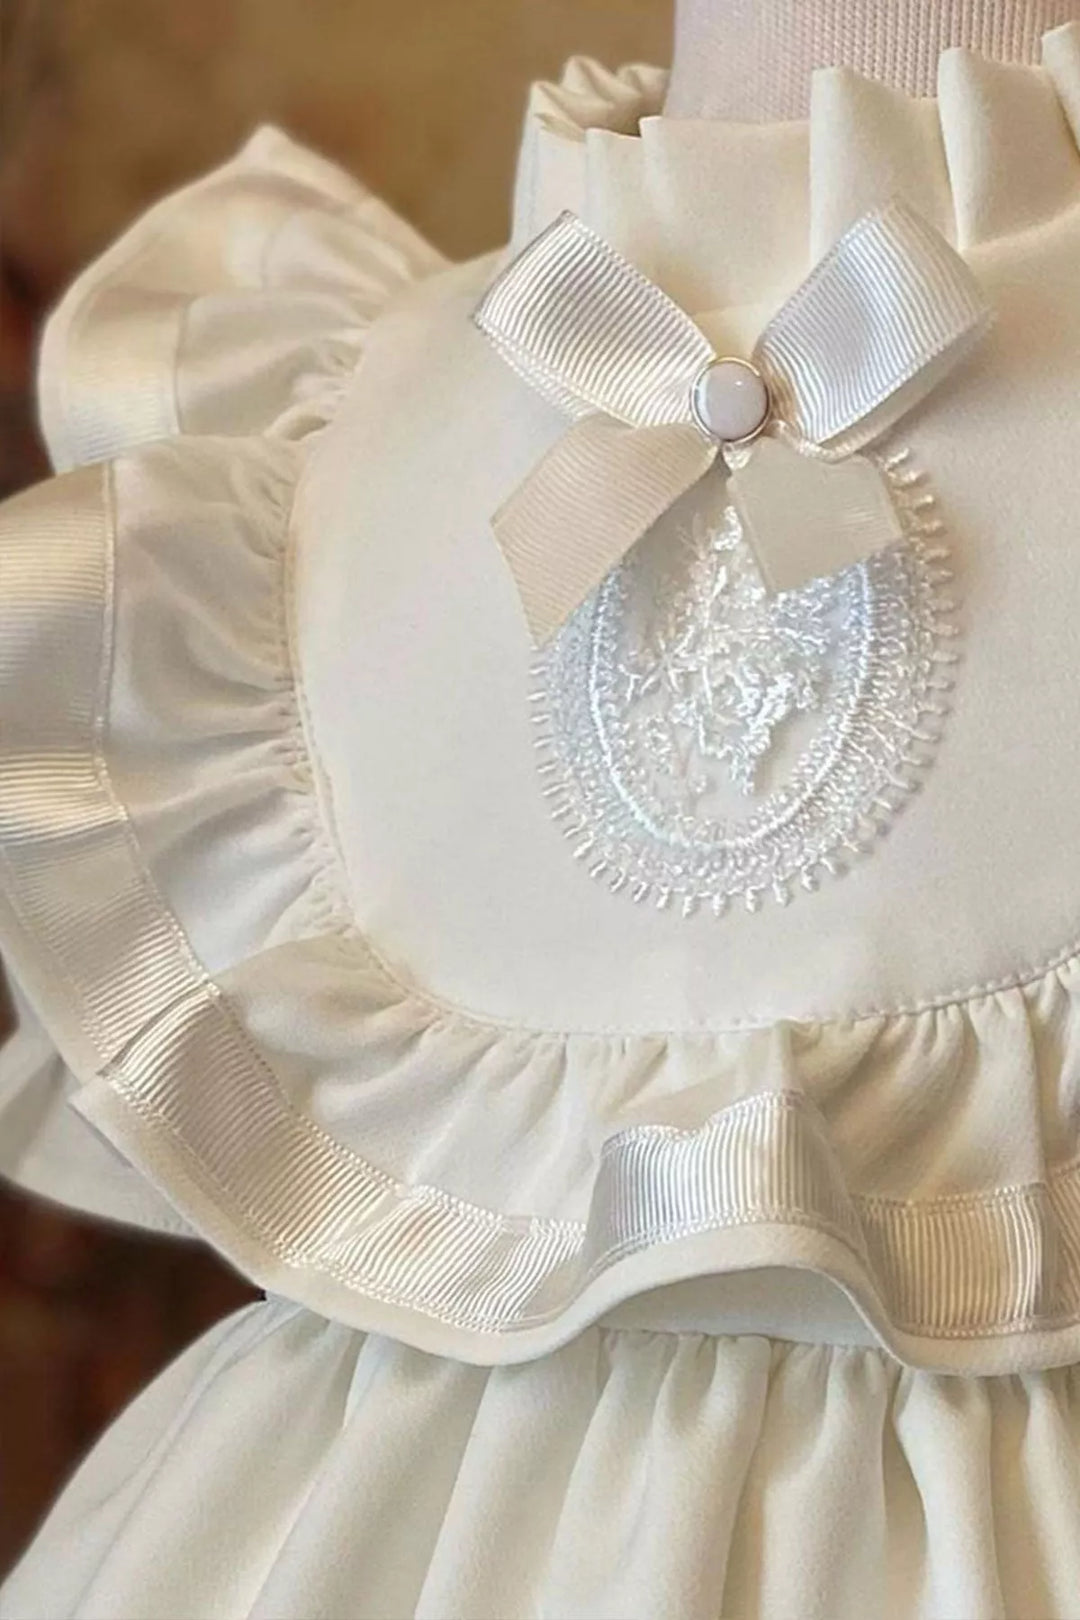 Close up view of a white vintage dress that has half sleeves, brooch, judge collar, lace embroidered chest, and knee length skirt